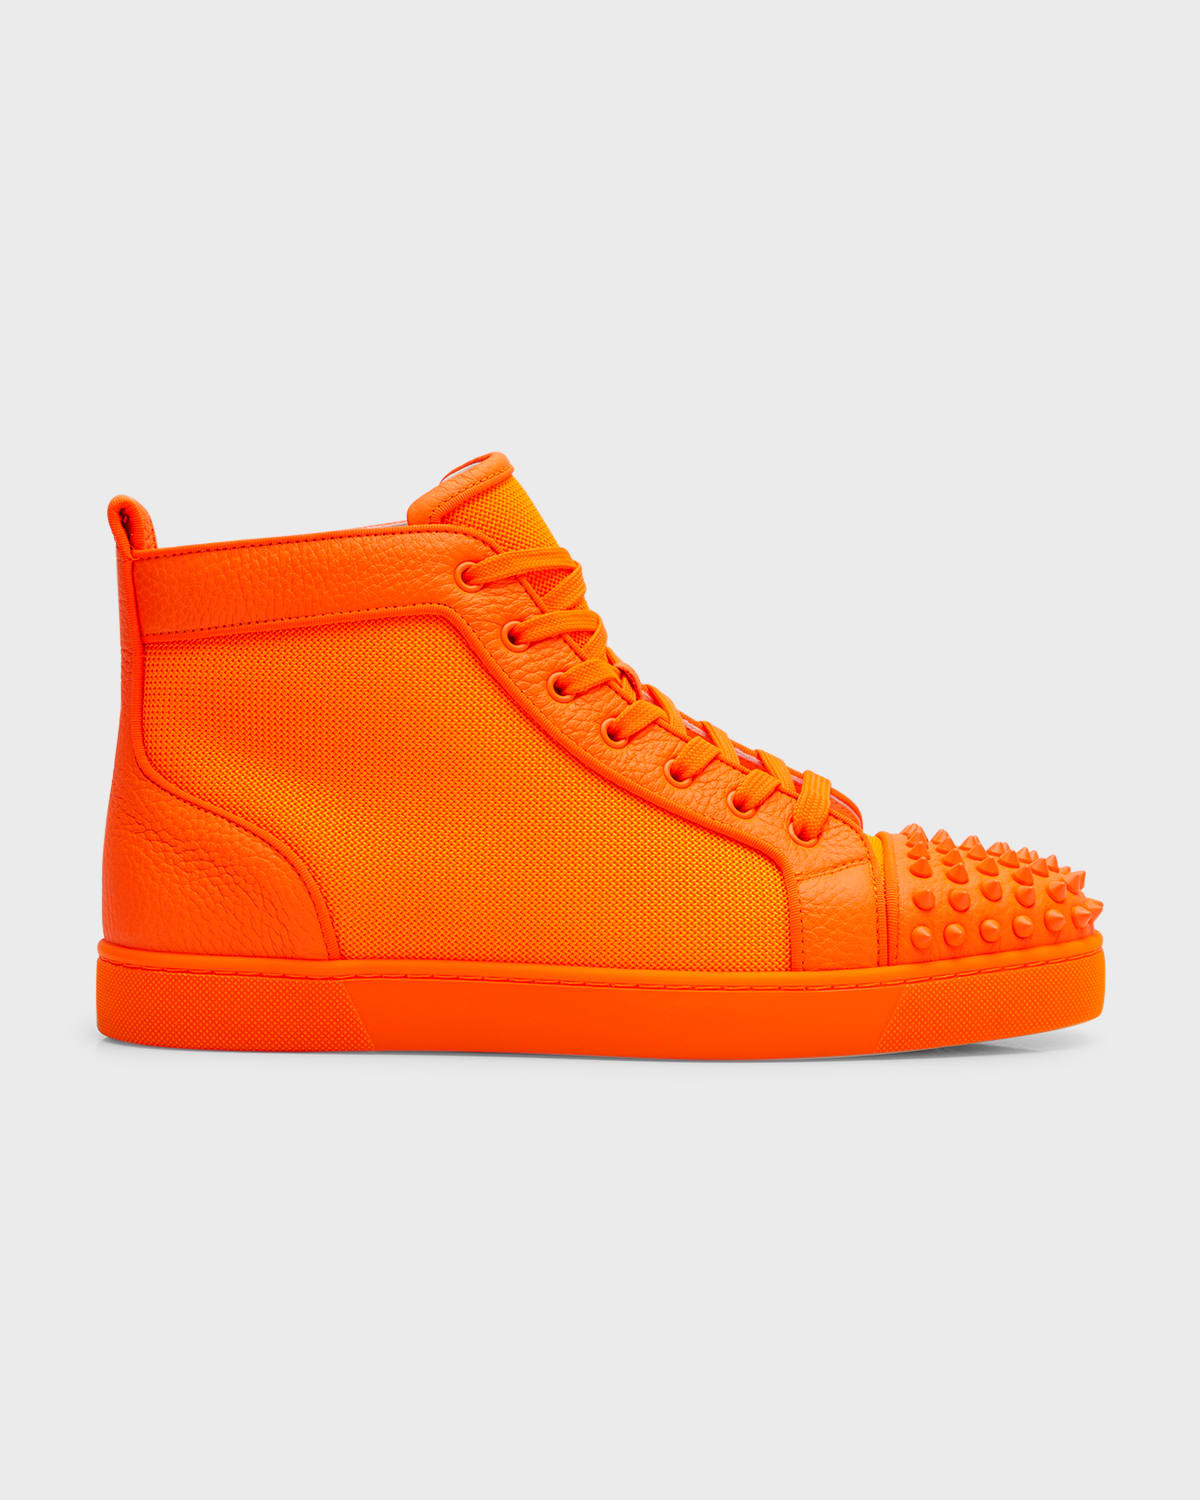 CHRISTIAN LOUBOUTIN Bengal Lou Spikes High-Top Sneakers - More